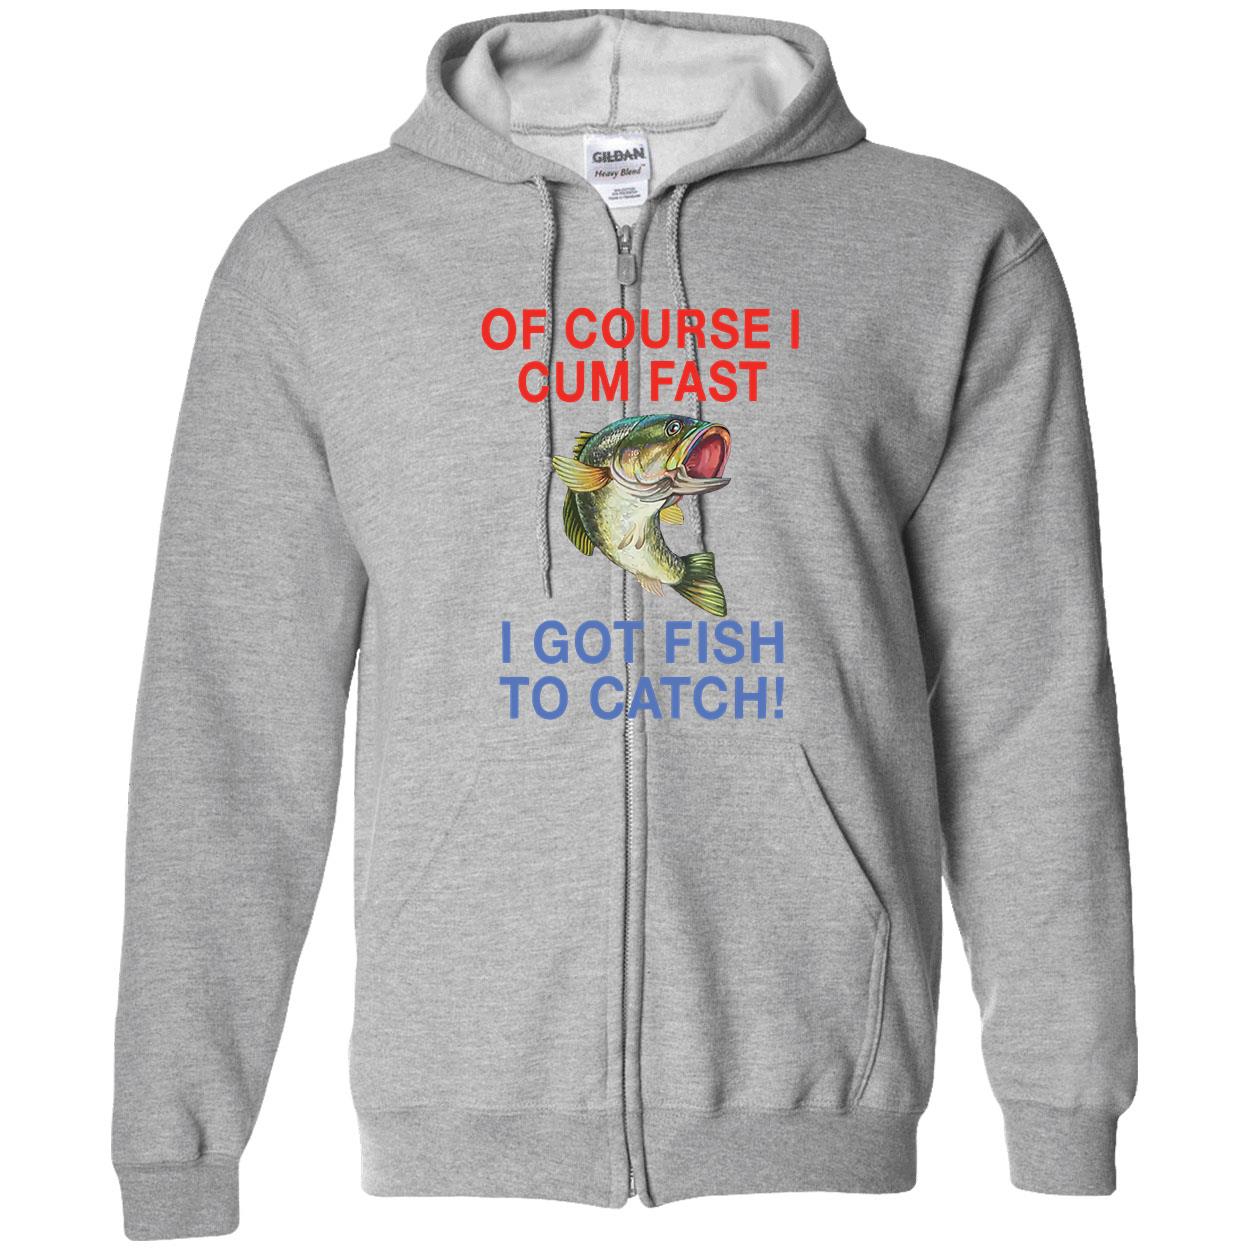 Order Now Of Course I Cum Fast I Got Fish To Catch Funny Fishing